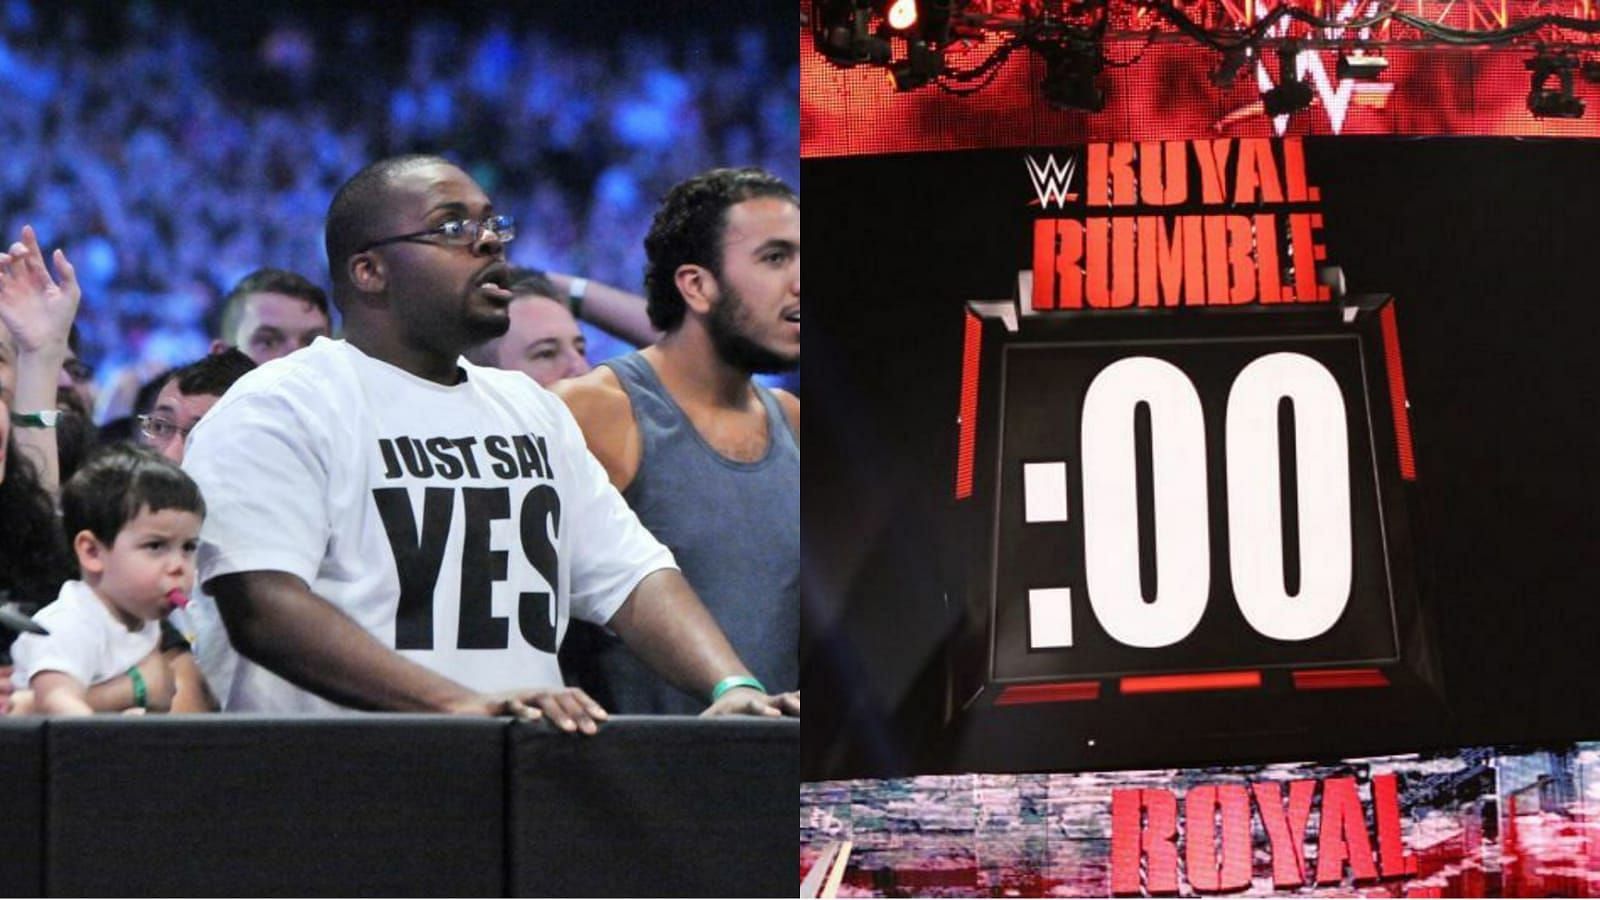 Royal Rumble will take place later this year!